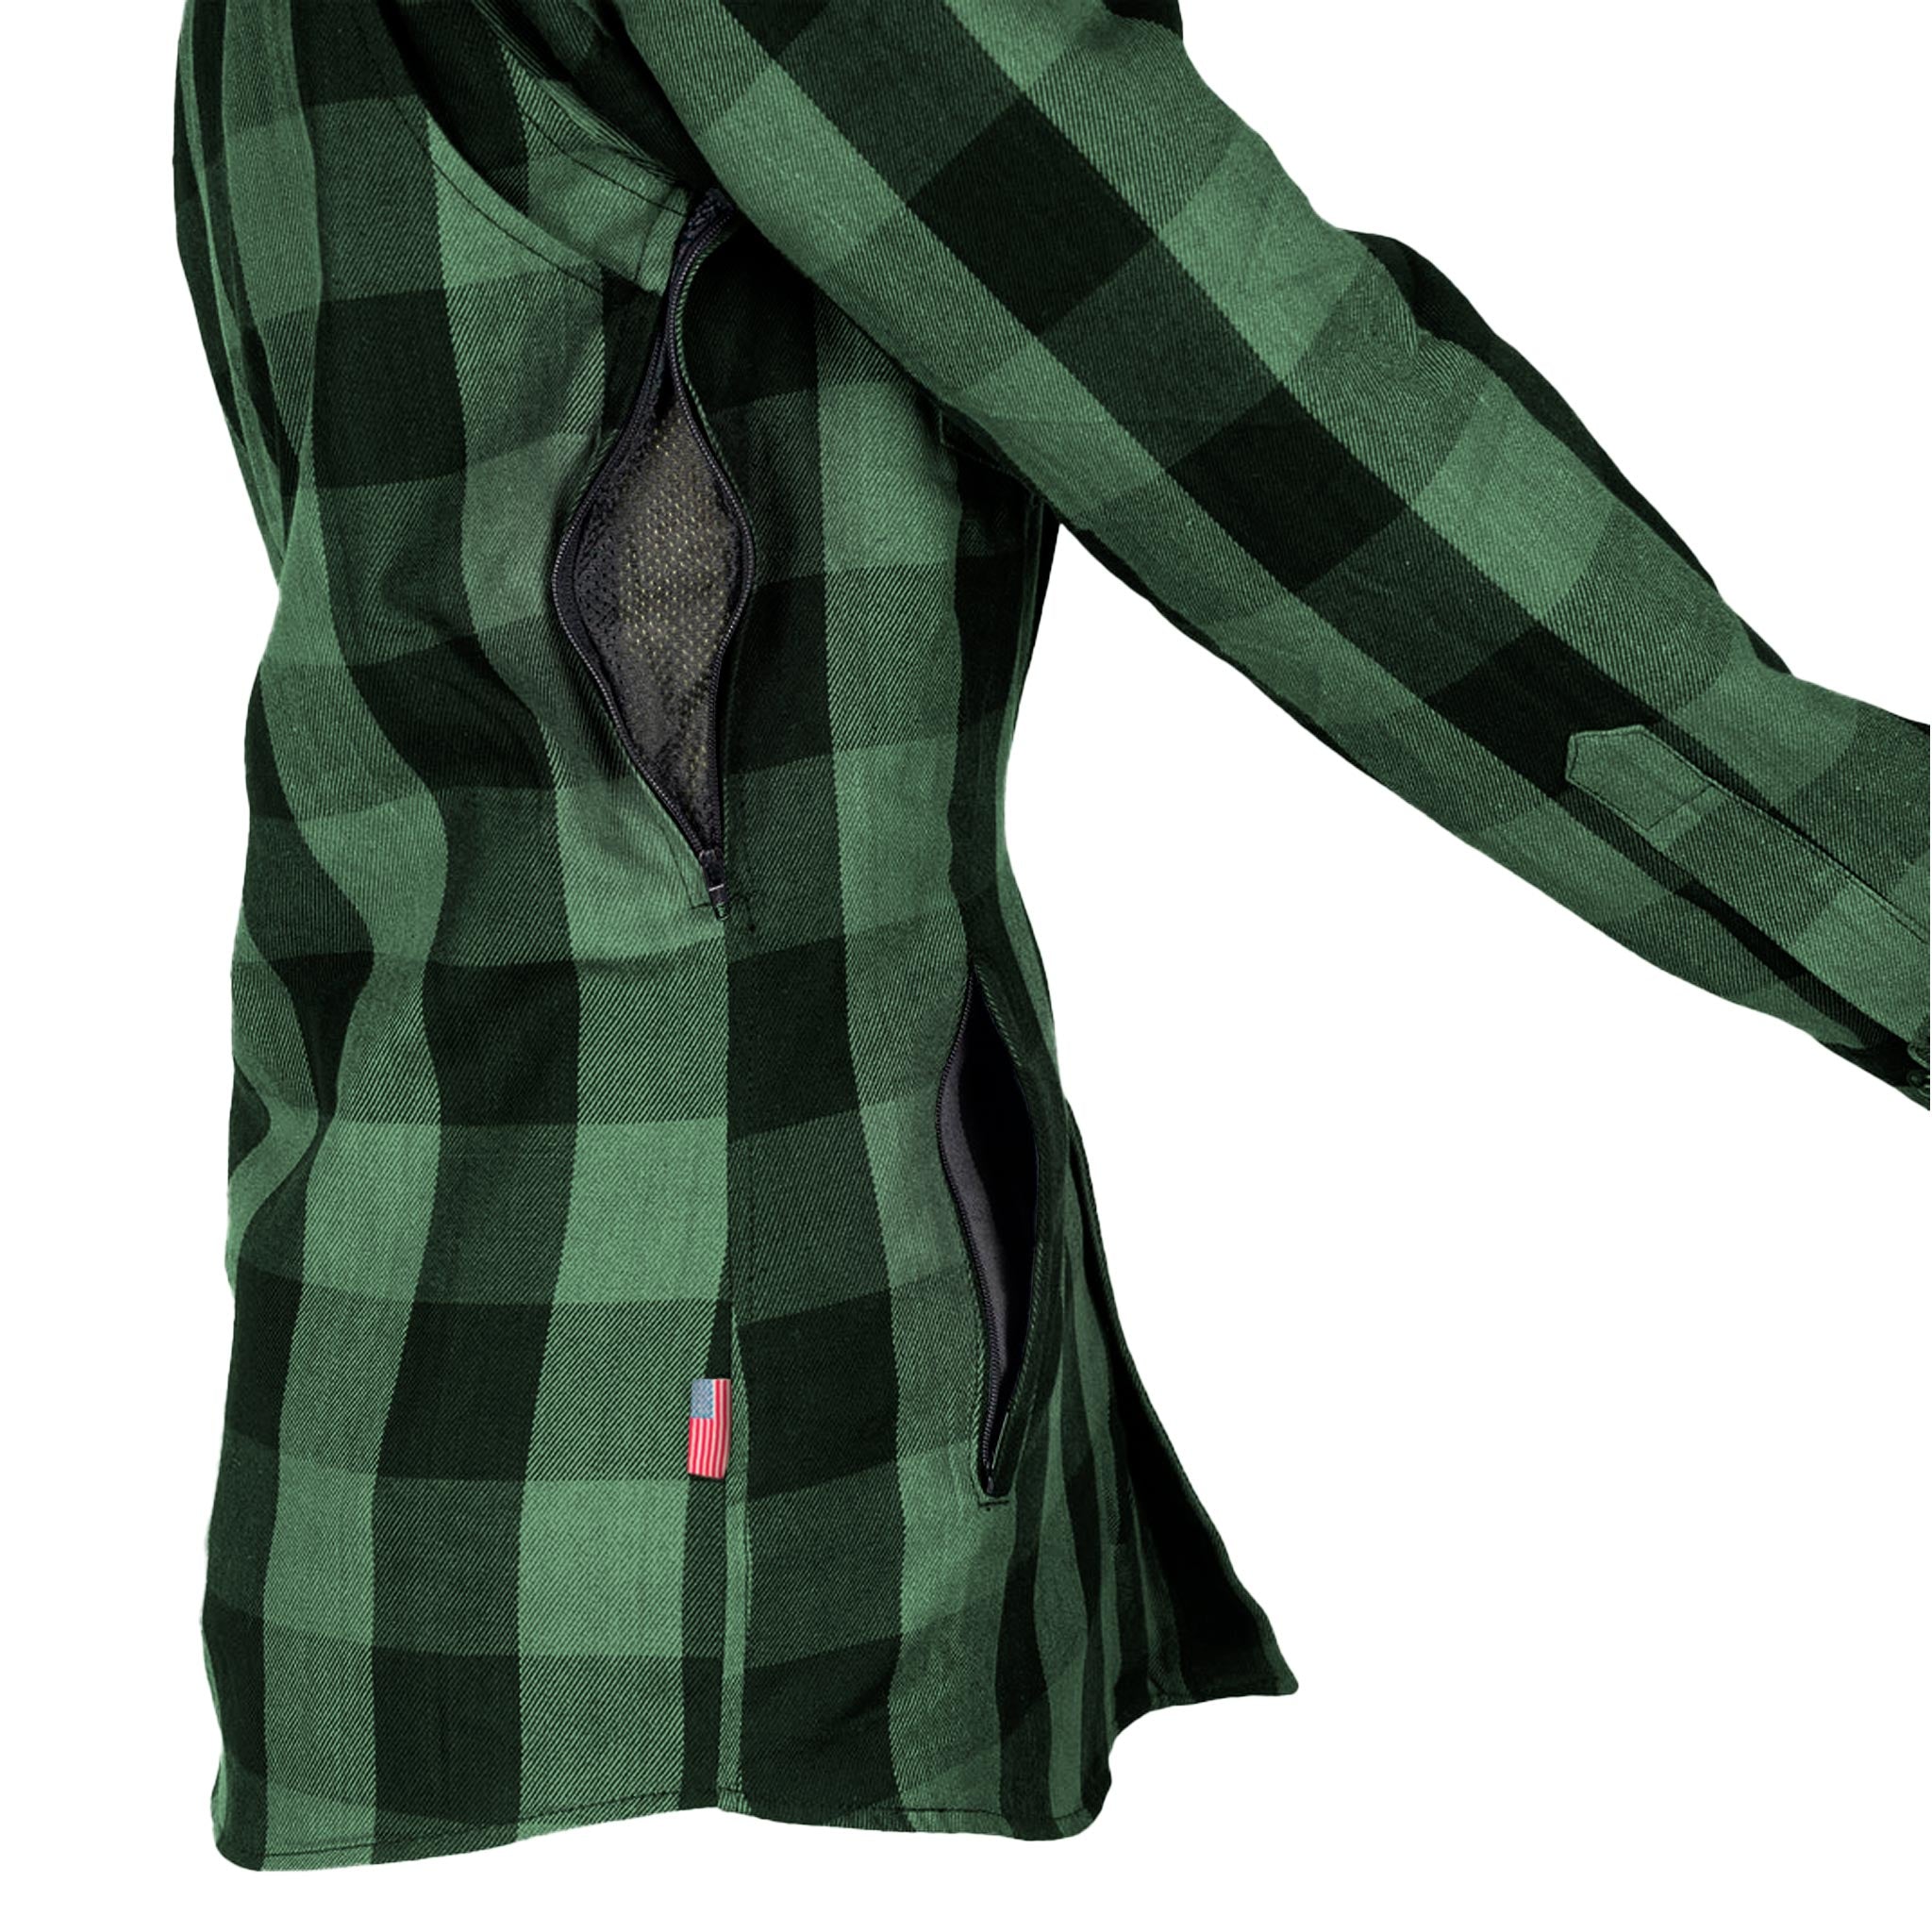 Protective Flannel Shirt for Women - Green Checkered